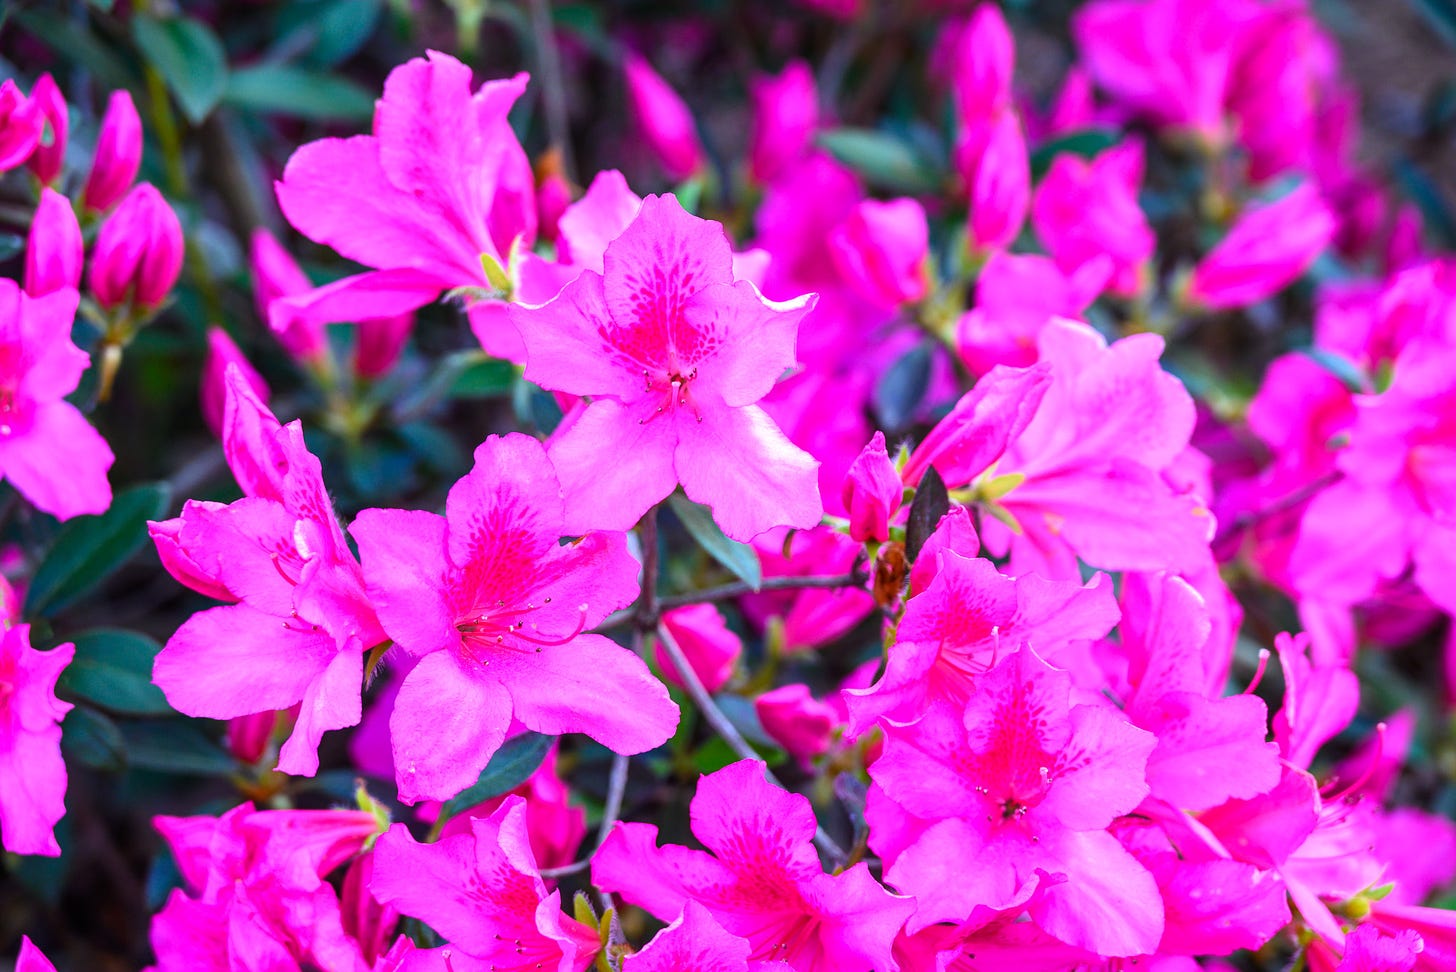 A close-up of pink Azaleas in full bloom.